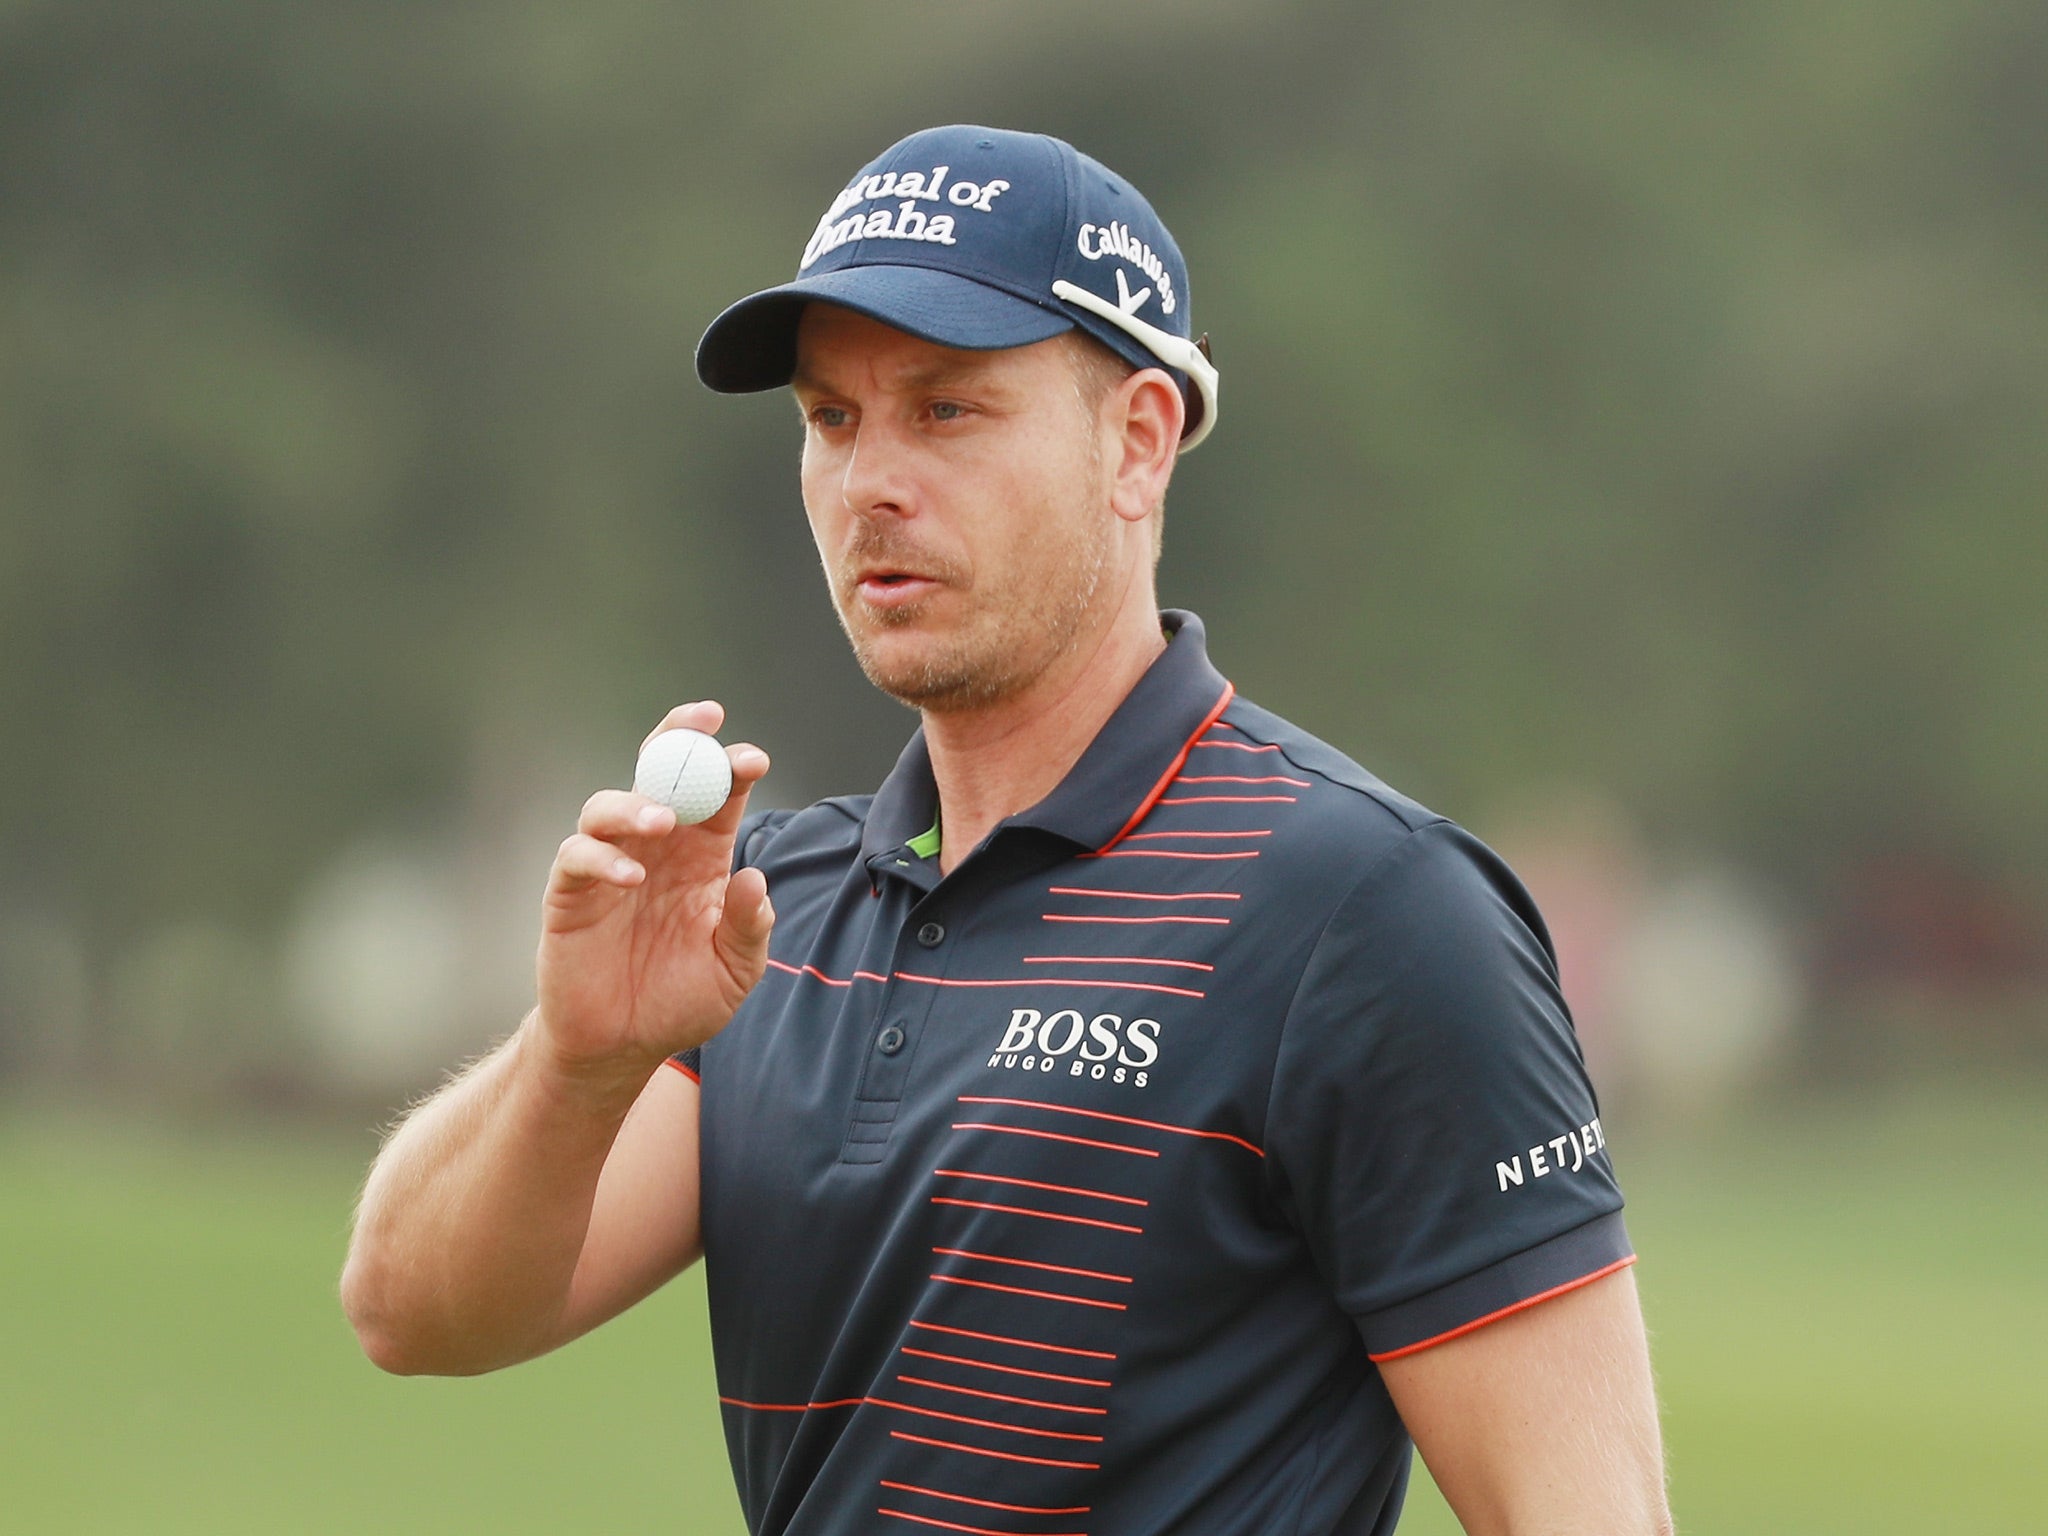 Stenson freely admits he has practised his skiing more than golf during the off-season